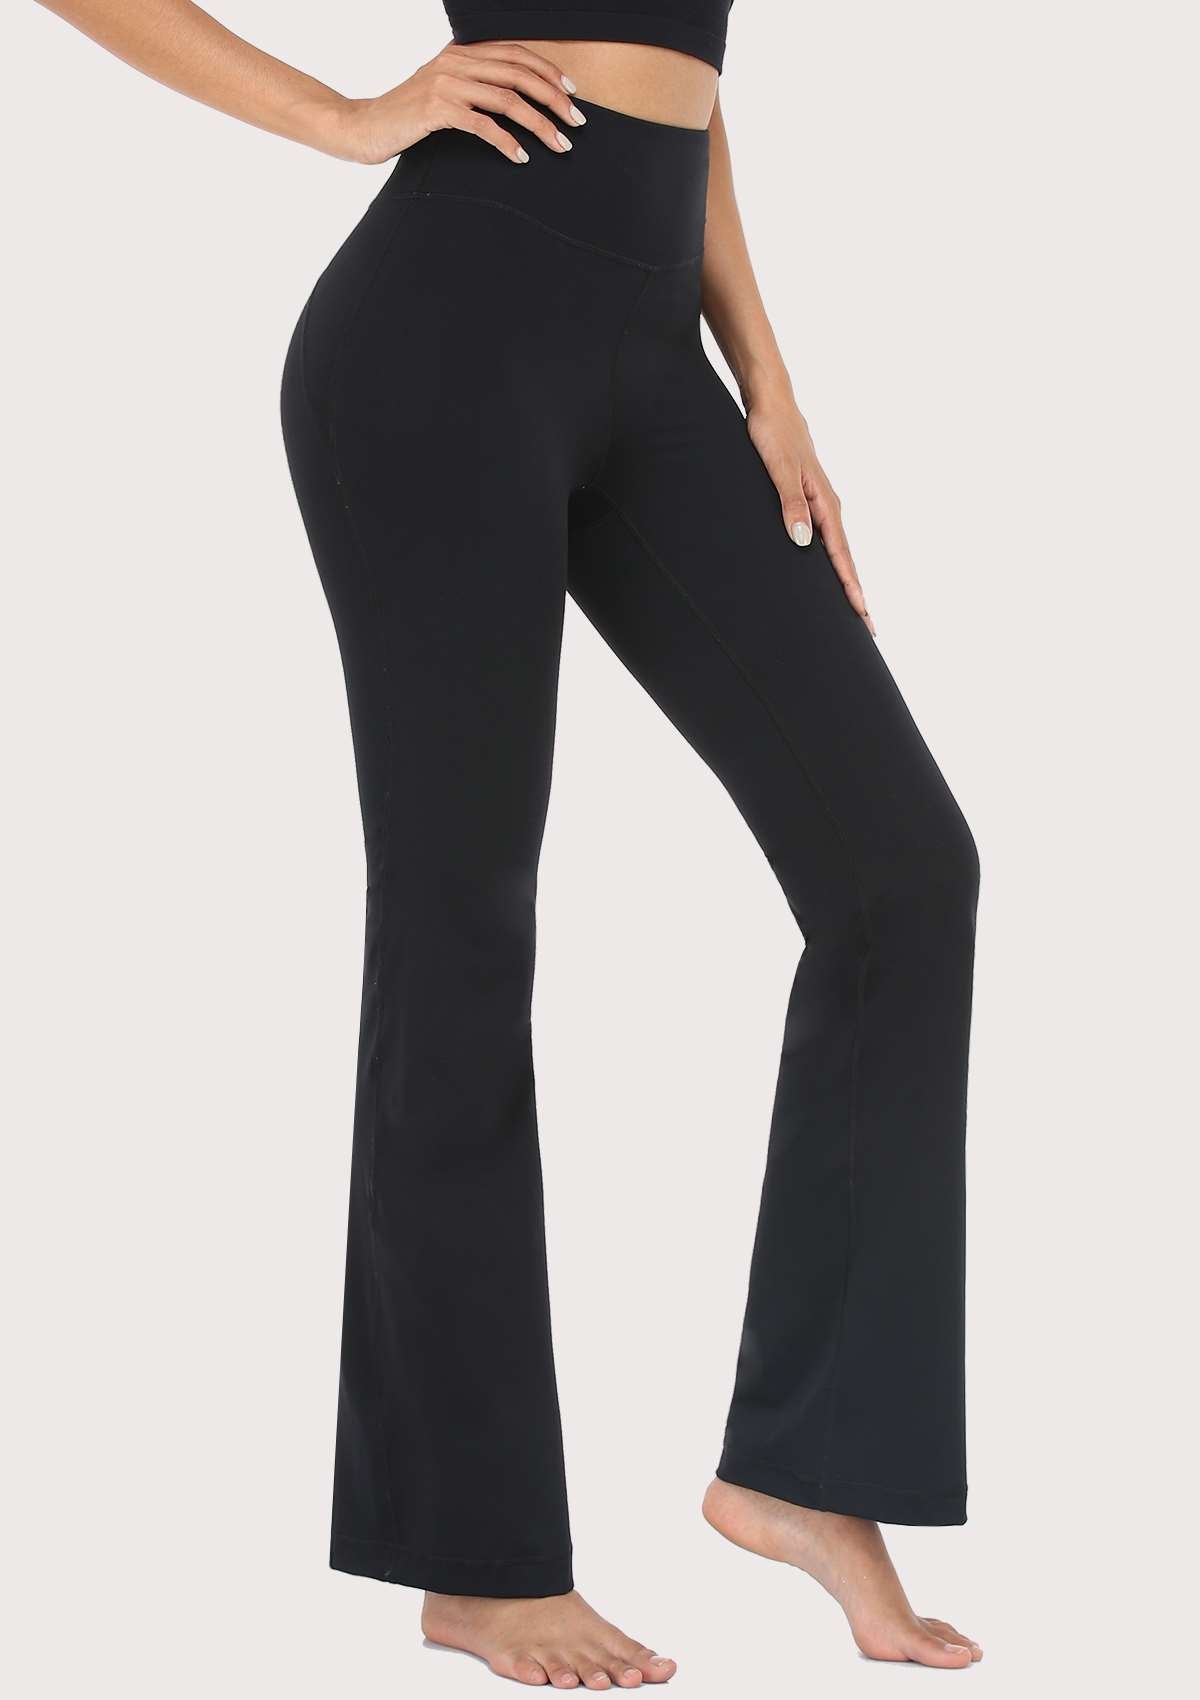 SONGFUL Smooth High Waisted Bootcut Yoga Sports Pants - S / Dark Blue